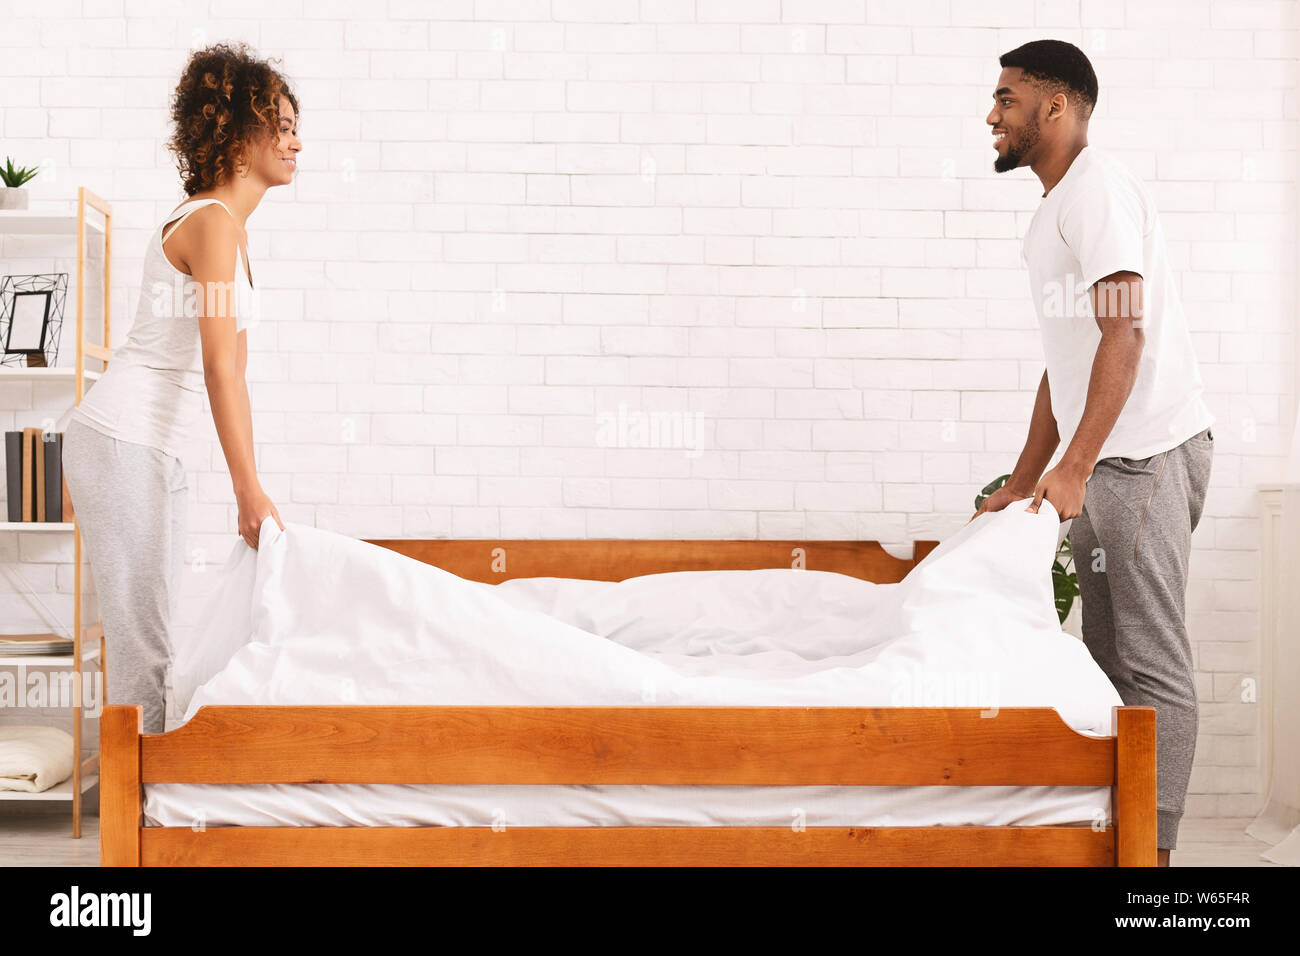 Charming Beautiful Couple In Love Making Bed Together Stock Photo